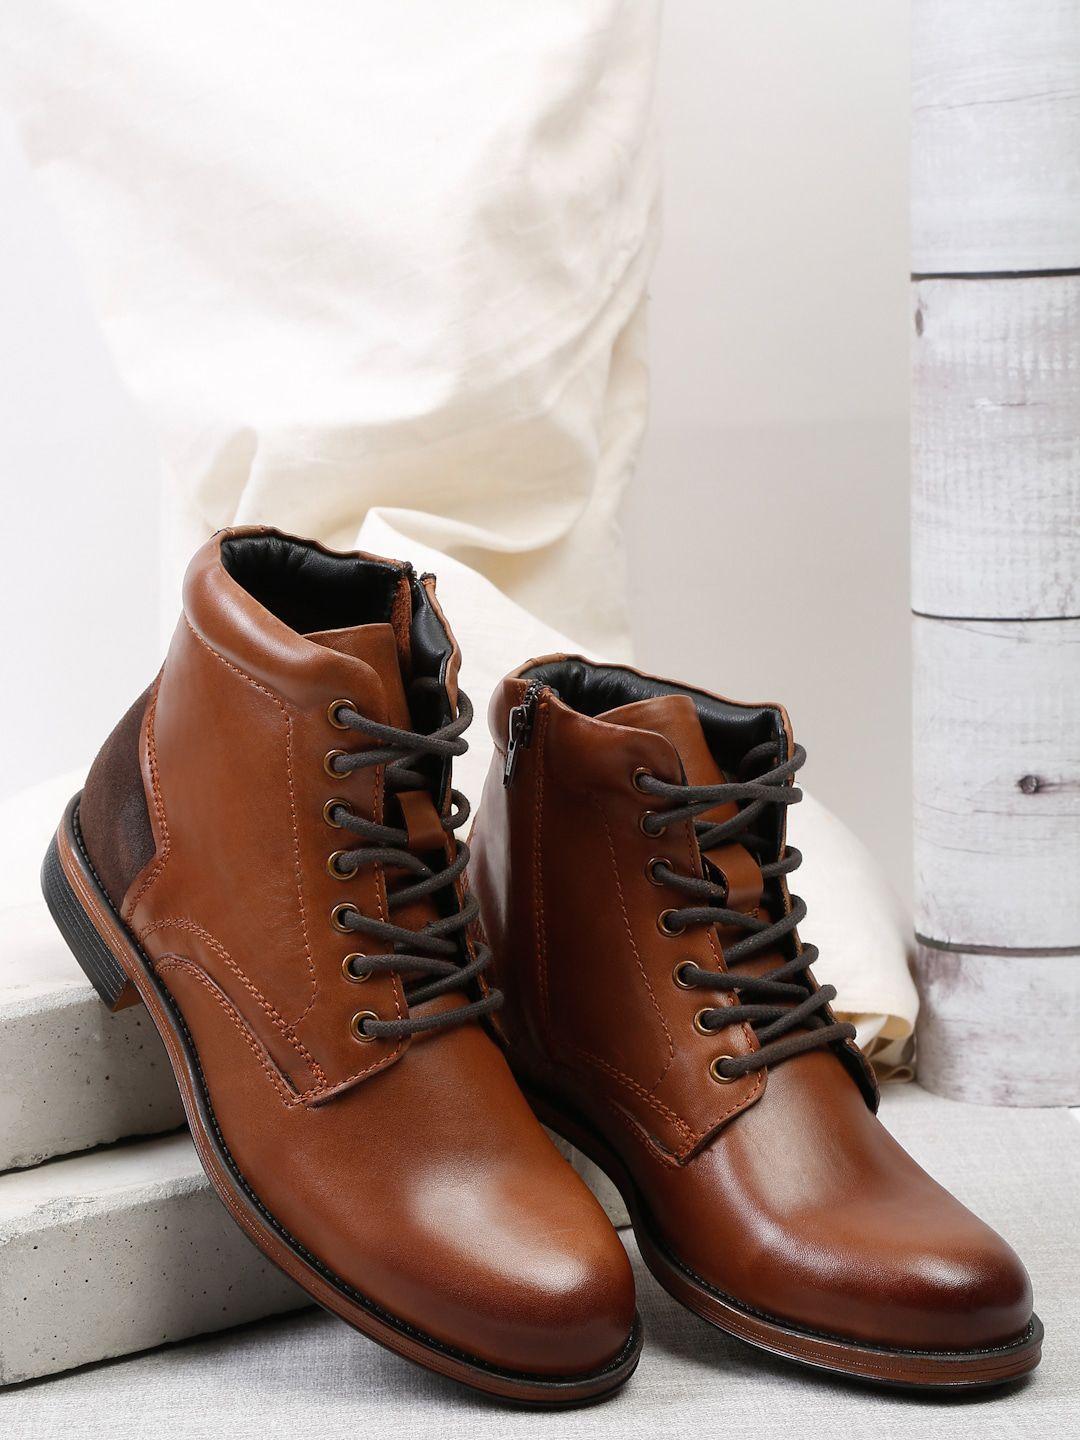 teakwood leathers men tan-colored solid leather boots